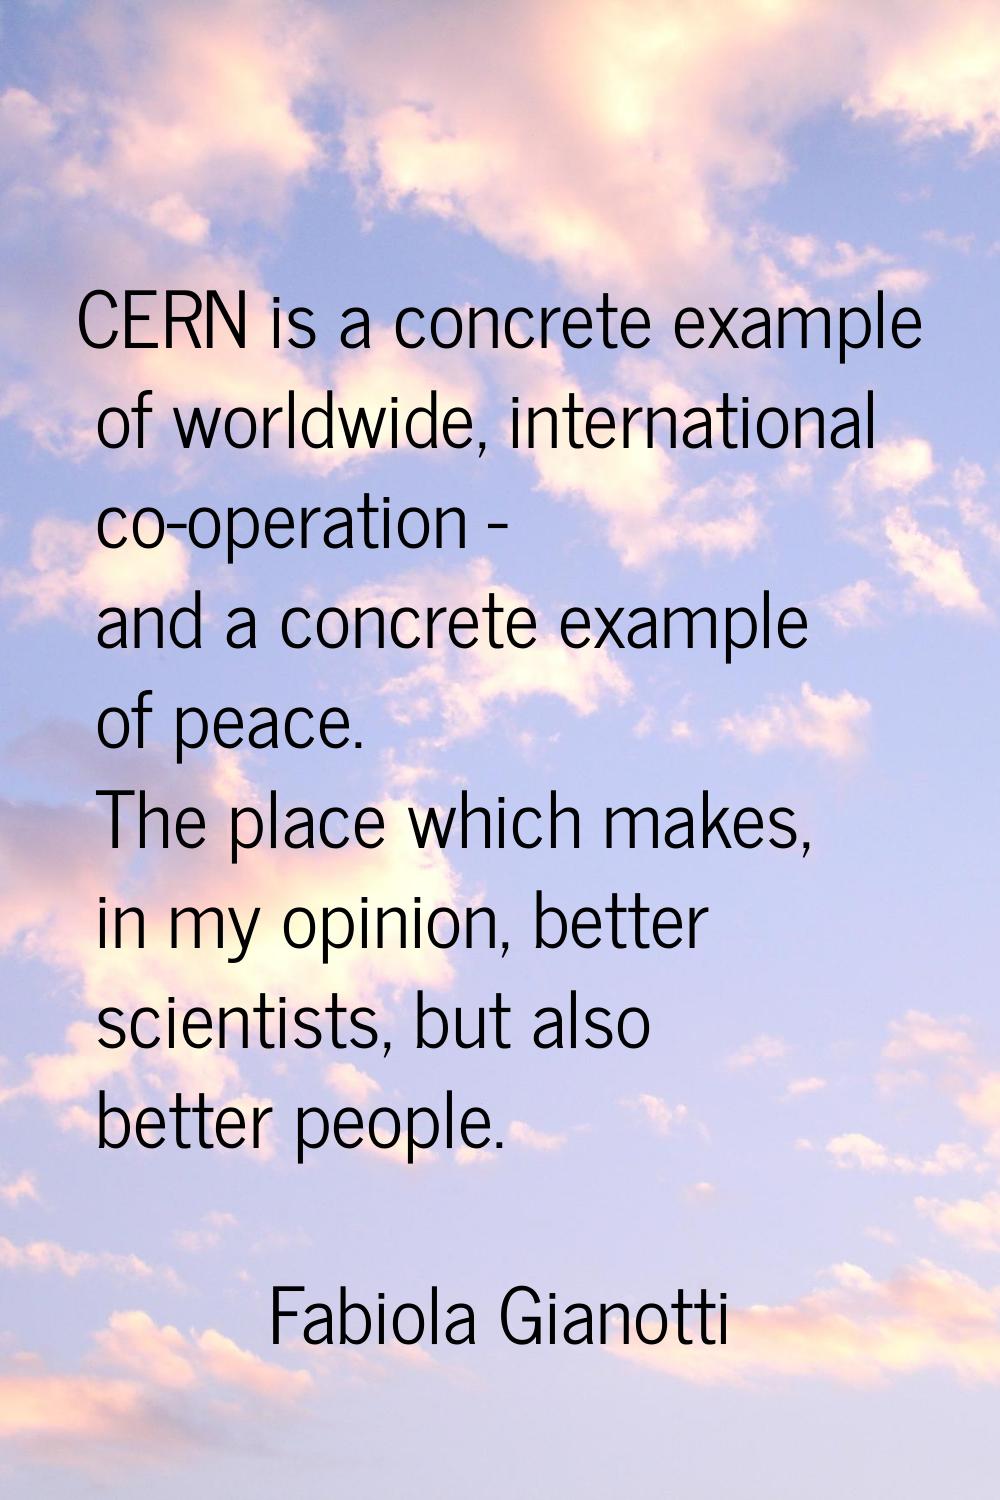 CERN is a concrete example of worldwide, international co-operation - and a concrete example of pea